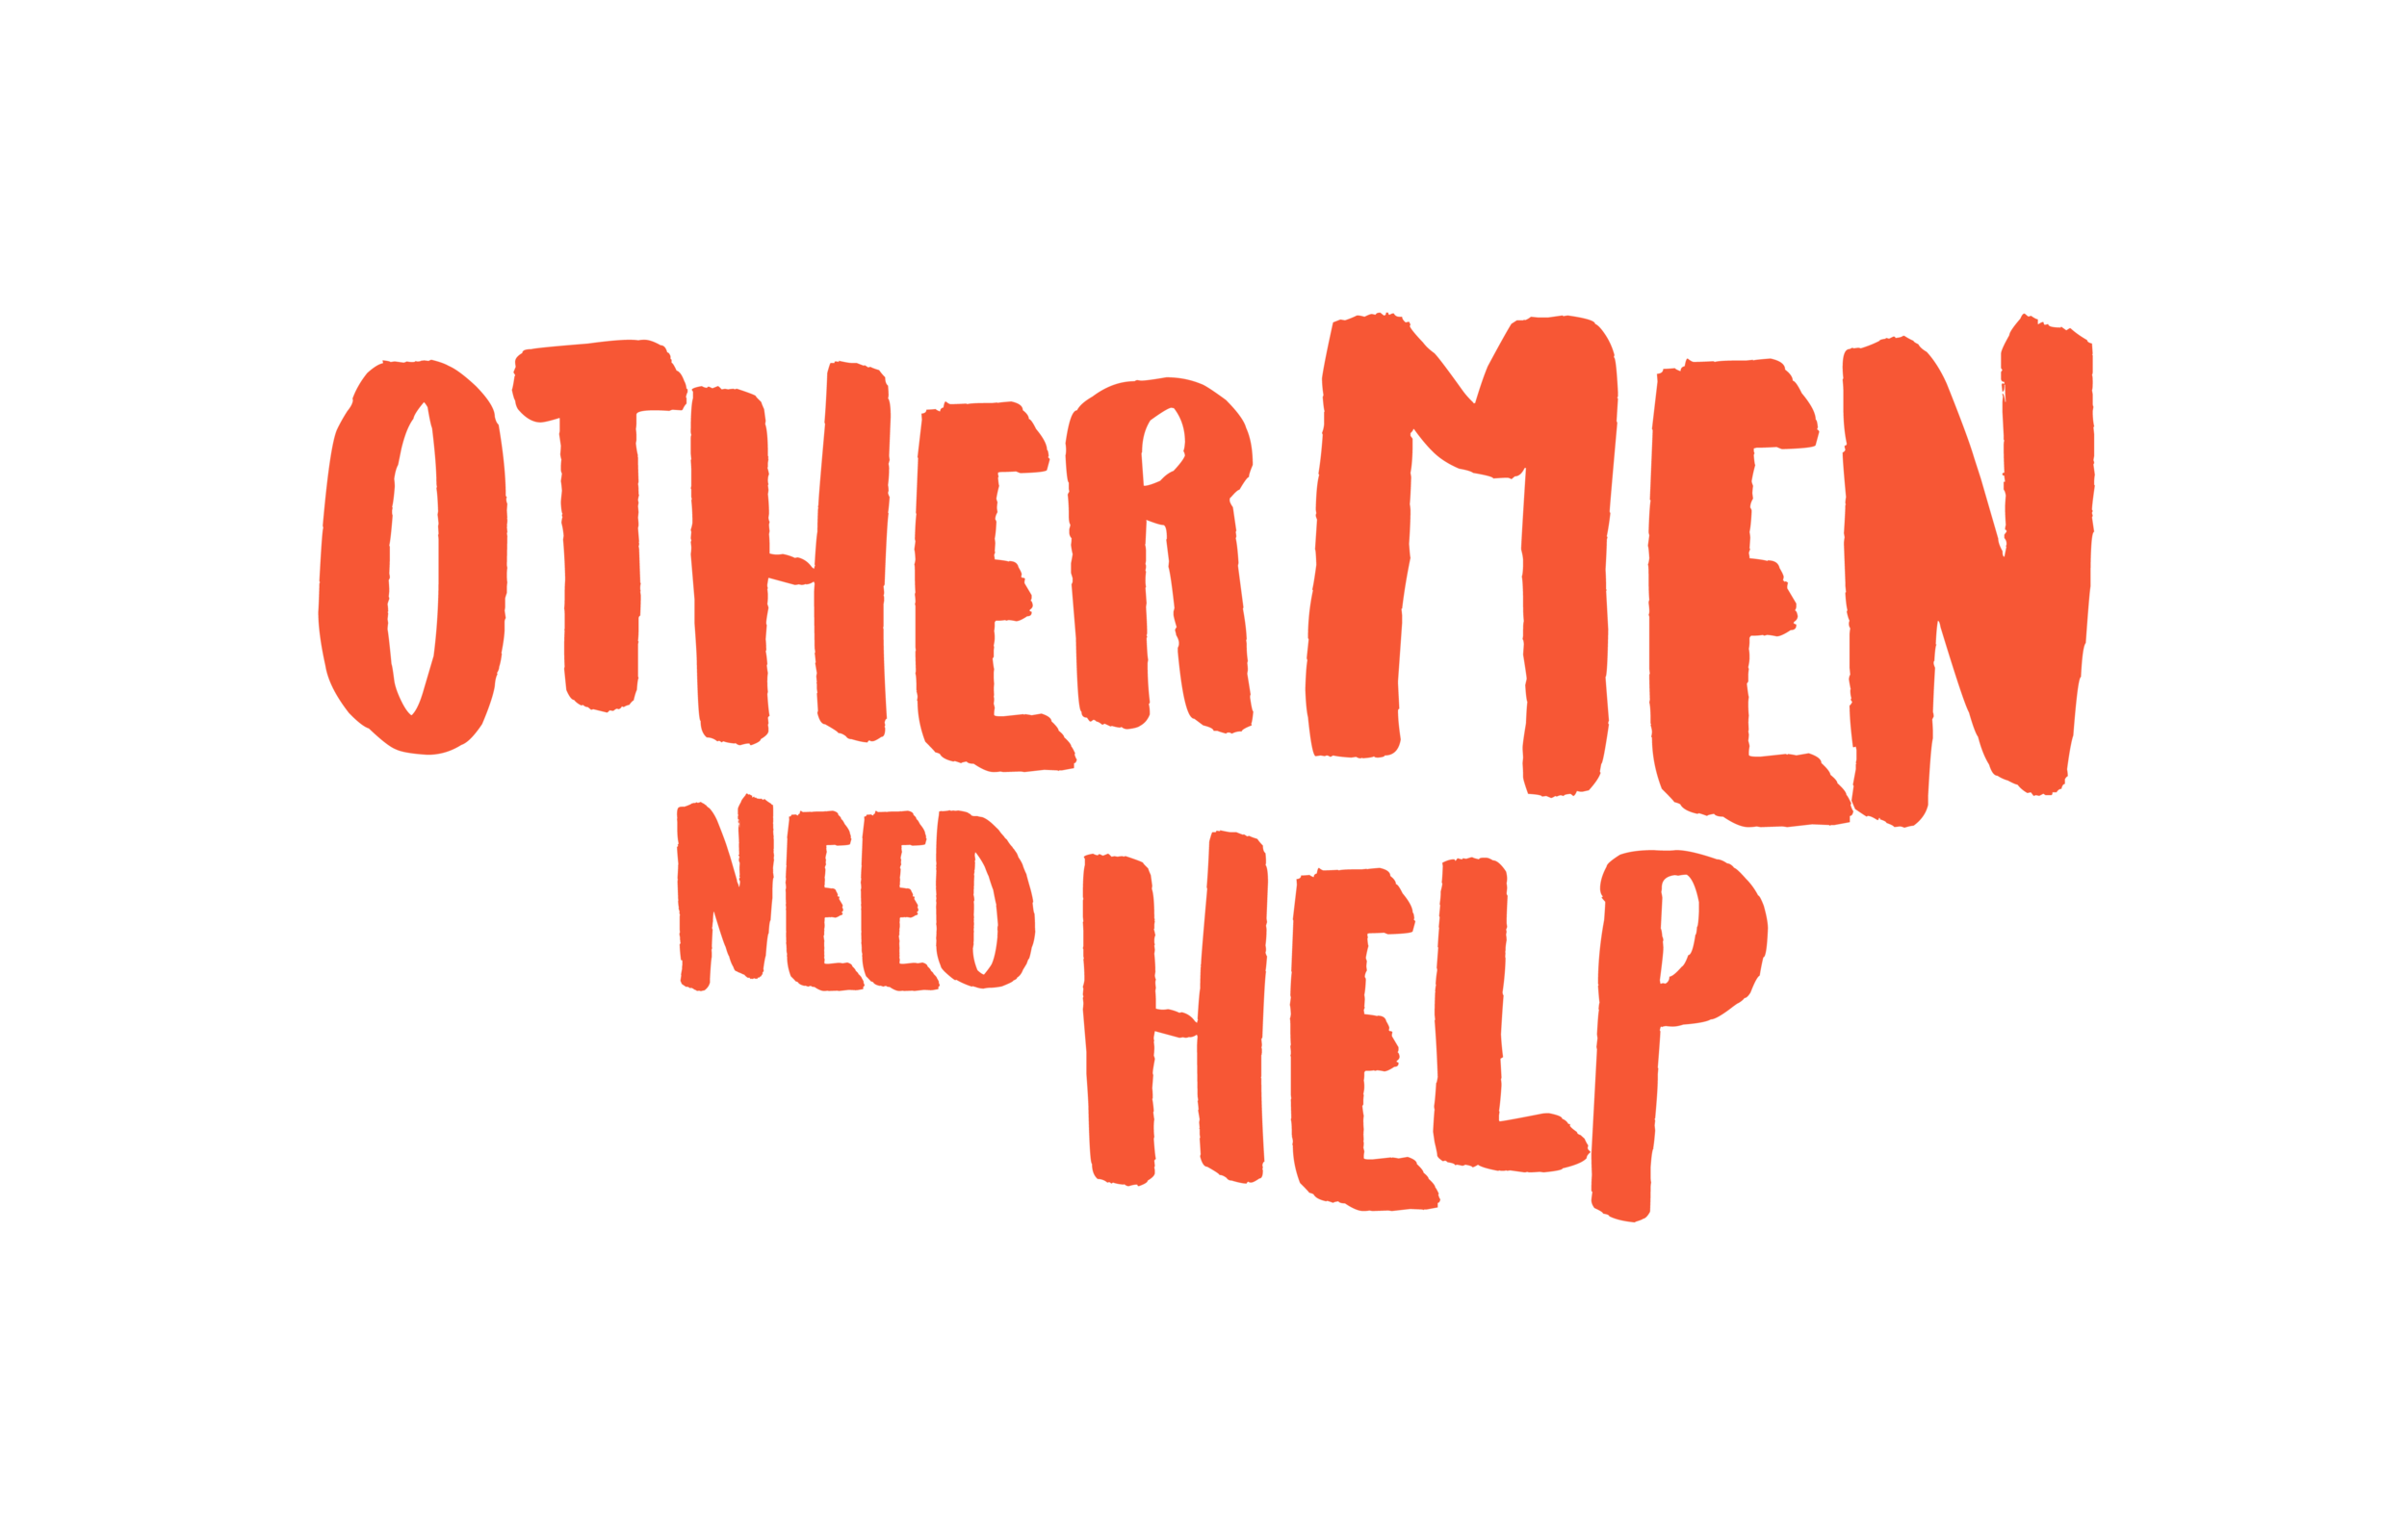 Other Men Need Help